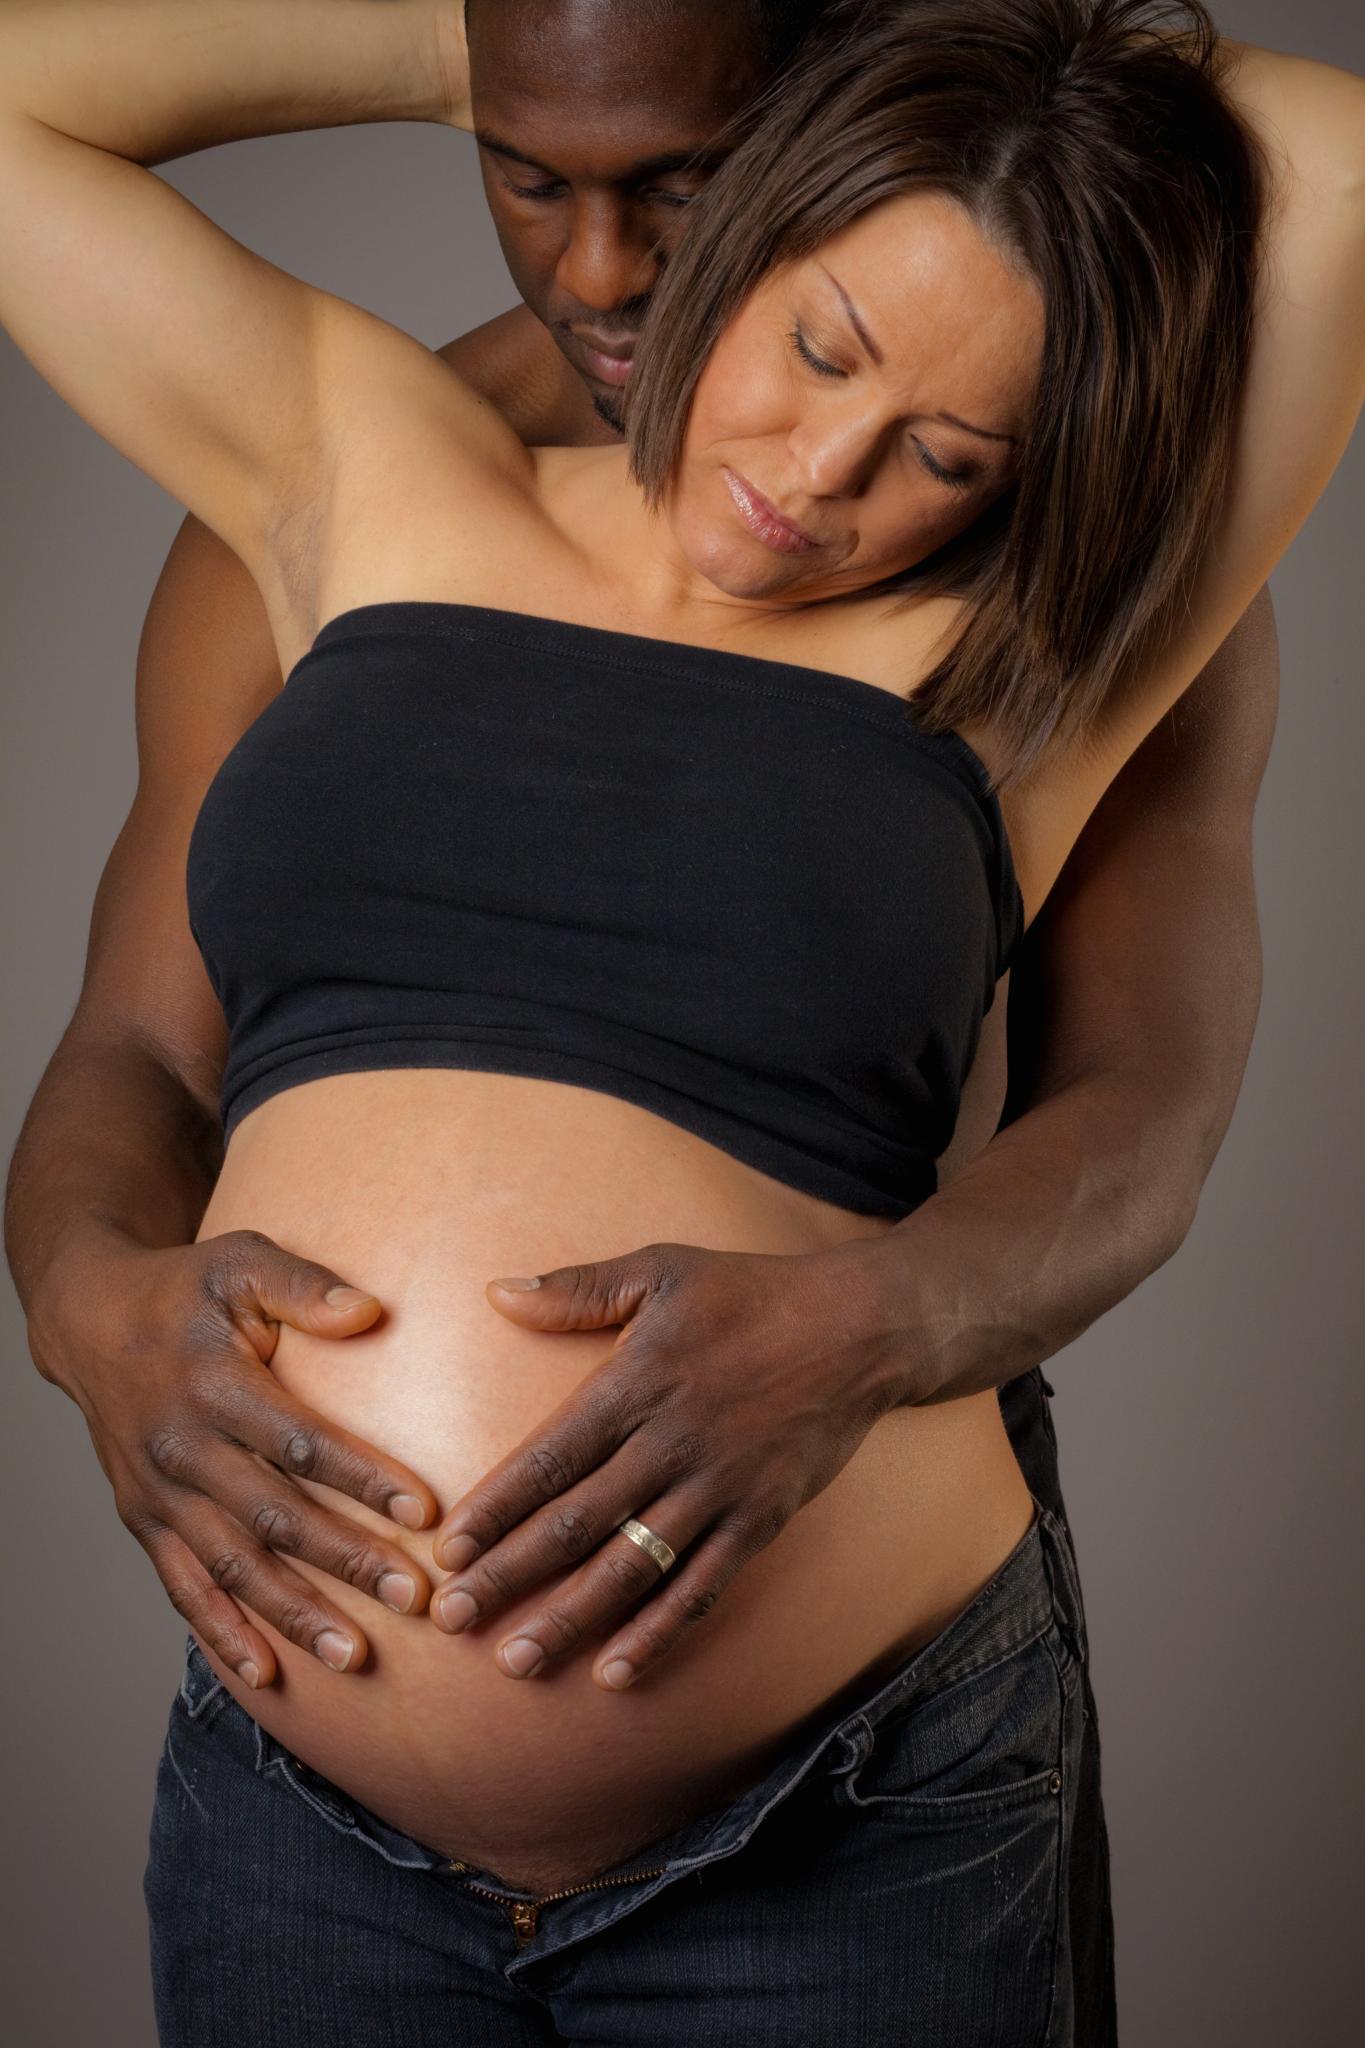 Intimacy Intervention: ‘My Pregnancy Turns Him On and Me Off!'